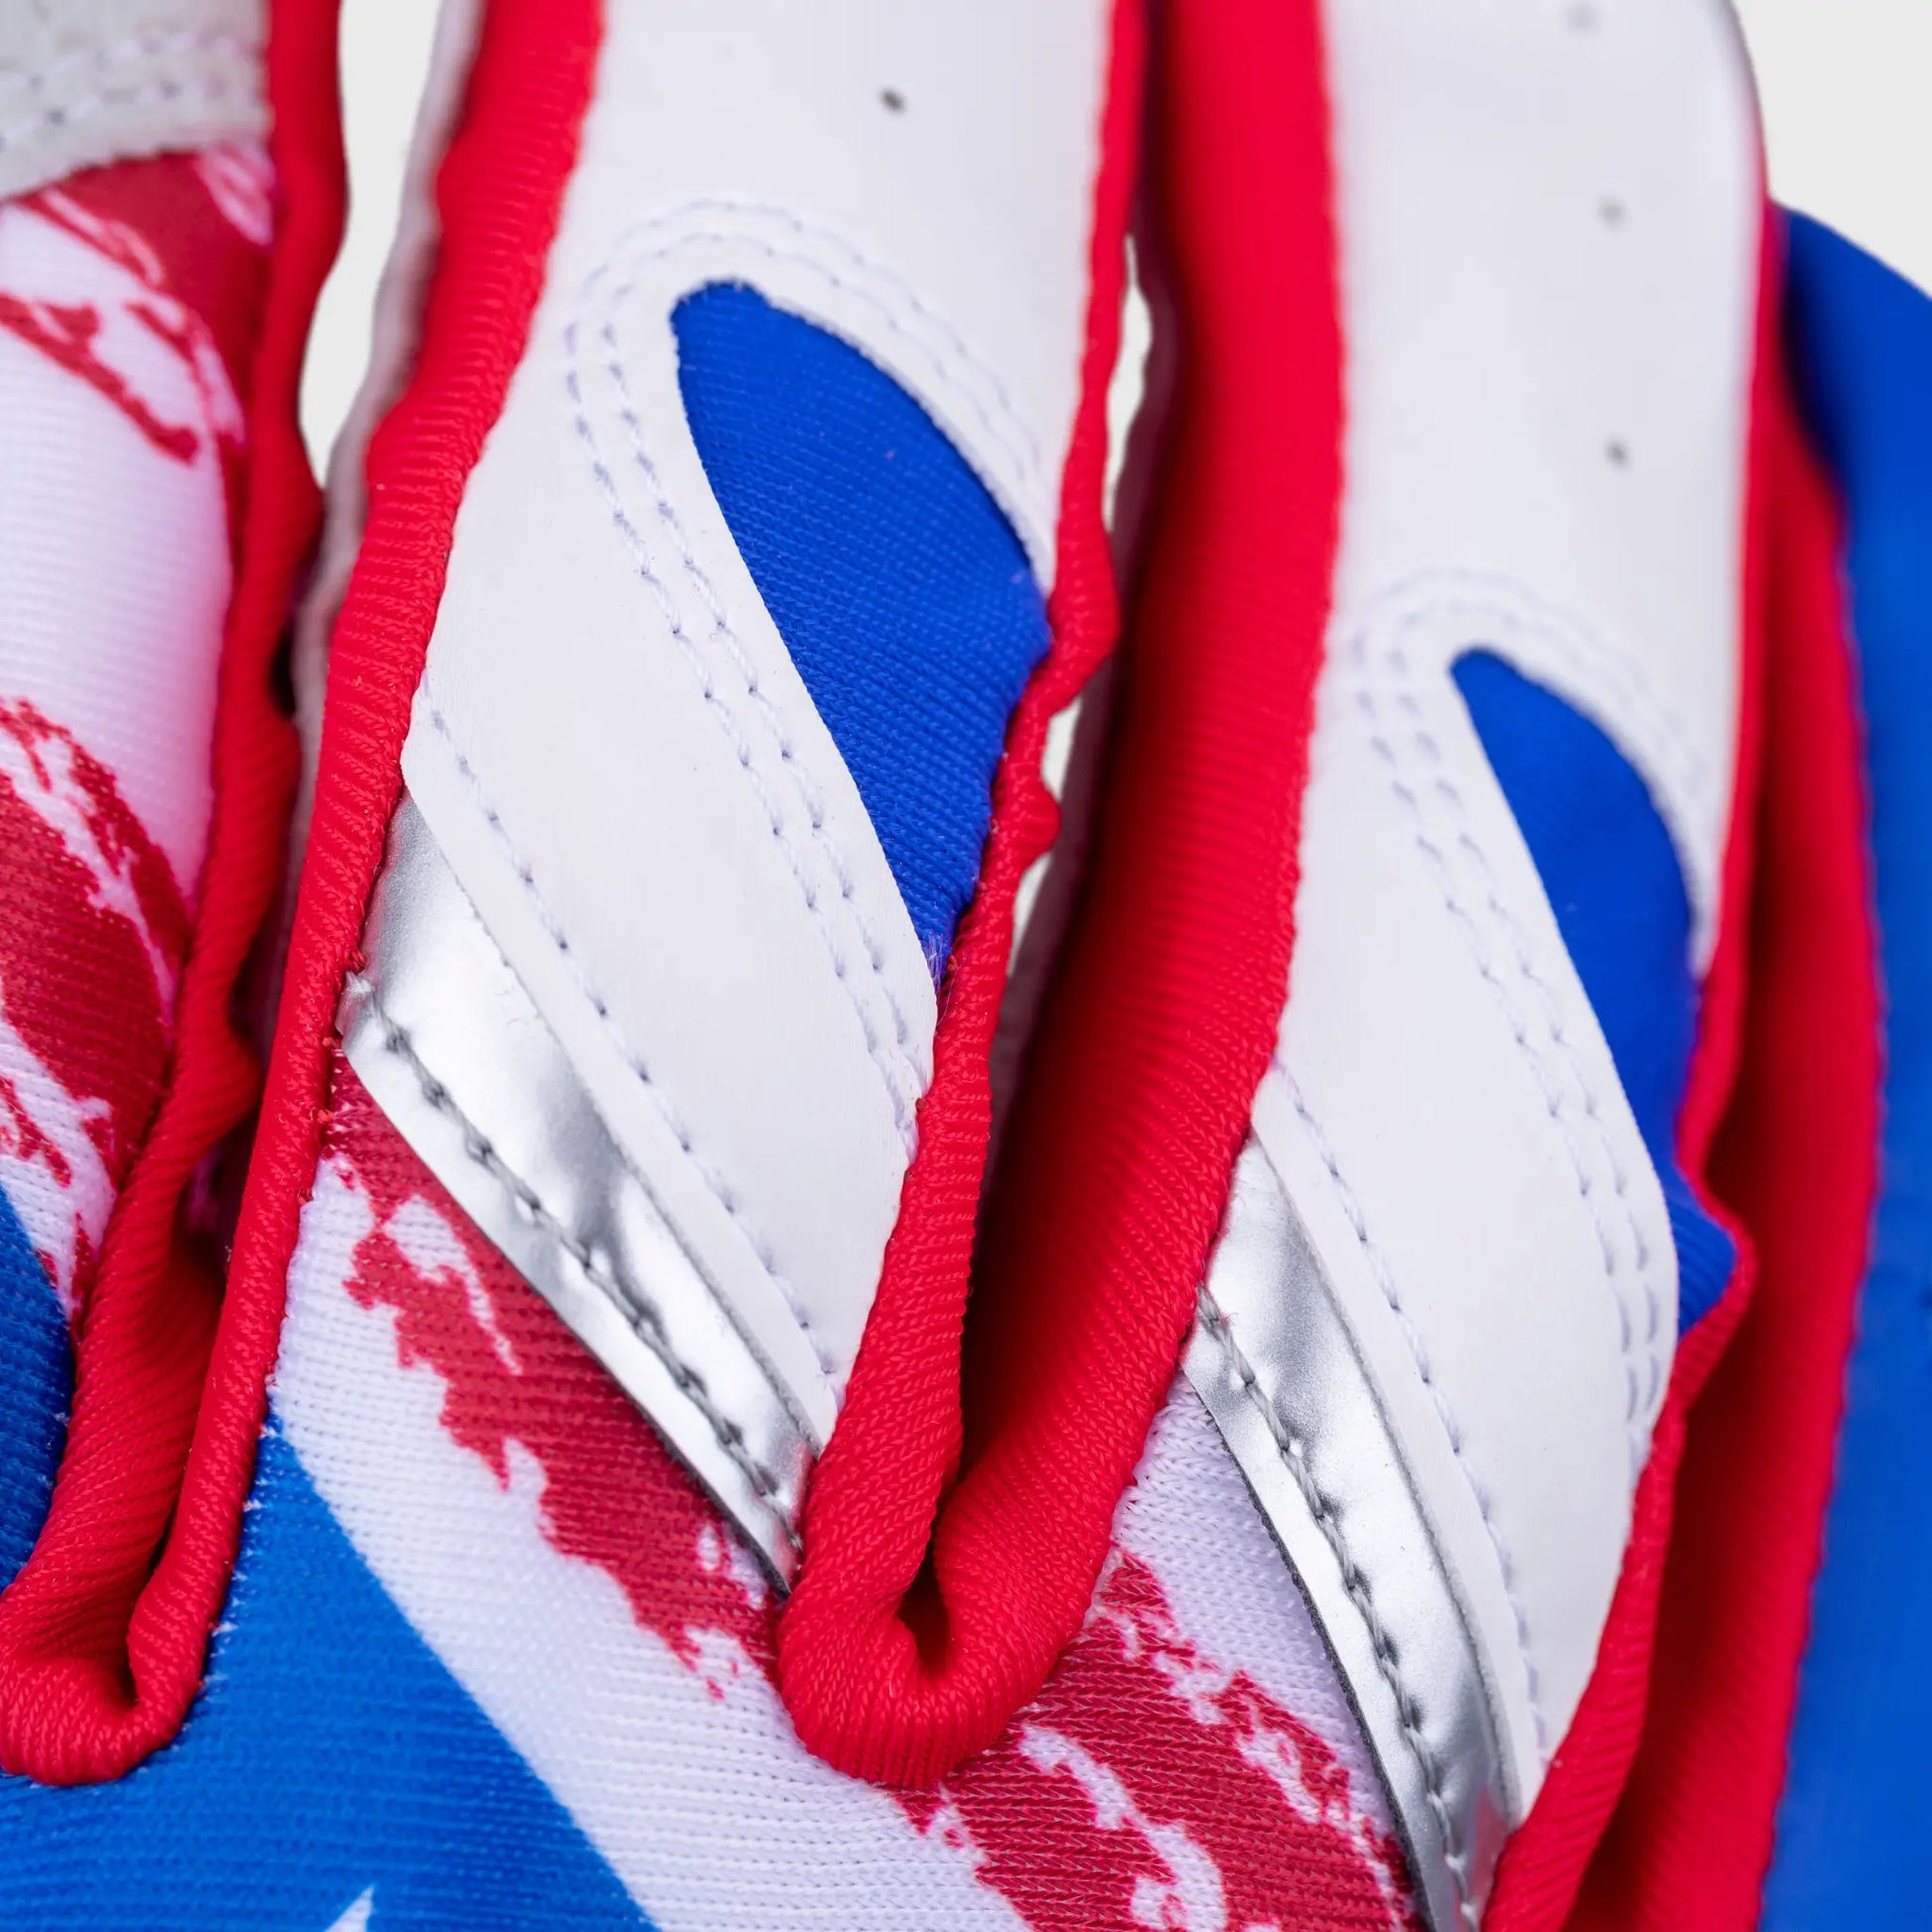 Intimate close-up of Tater Baseball batting gloves displaying the intricate finger design with vibrant red laces against a backdrop of the Puerto Rican flag's colors and pattern